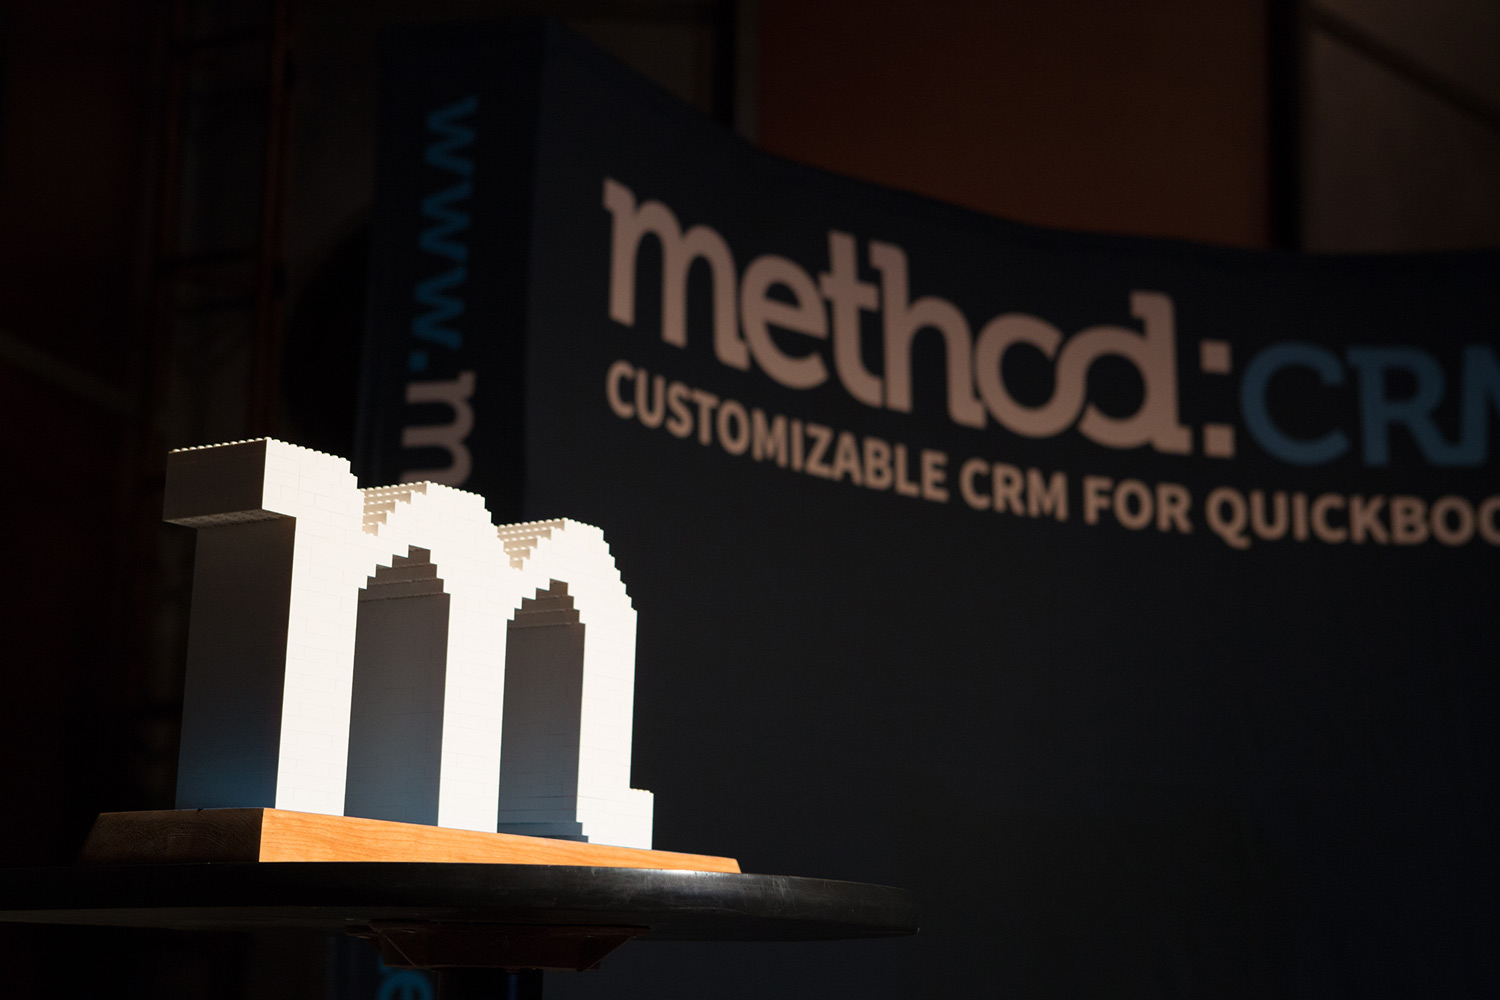 Method M built out of lego